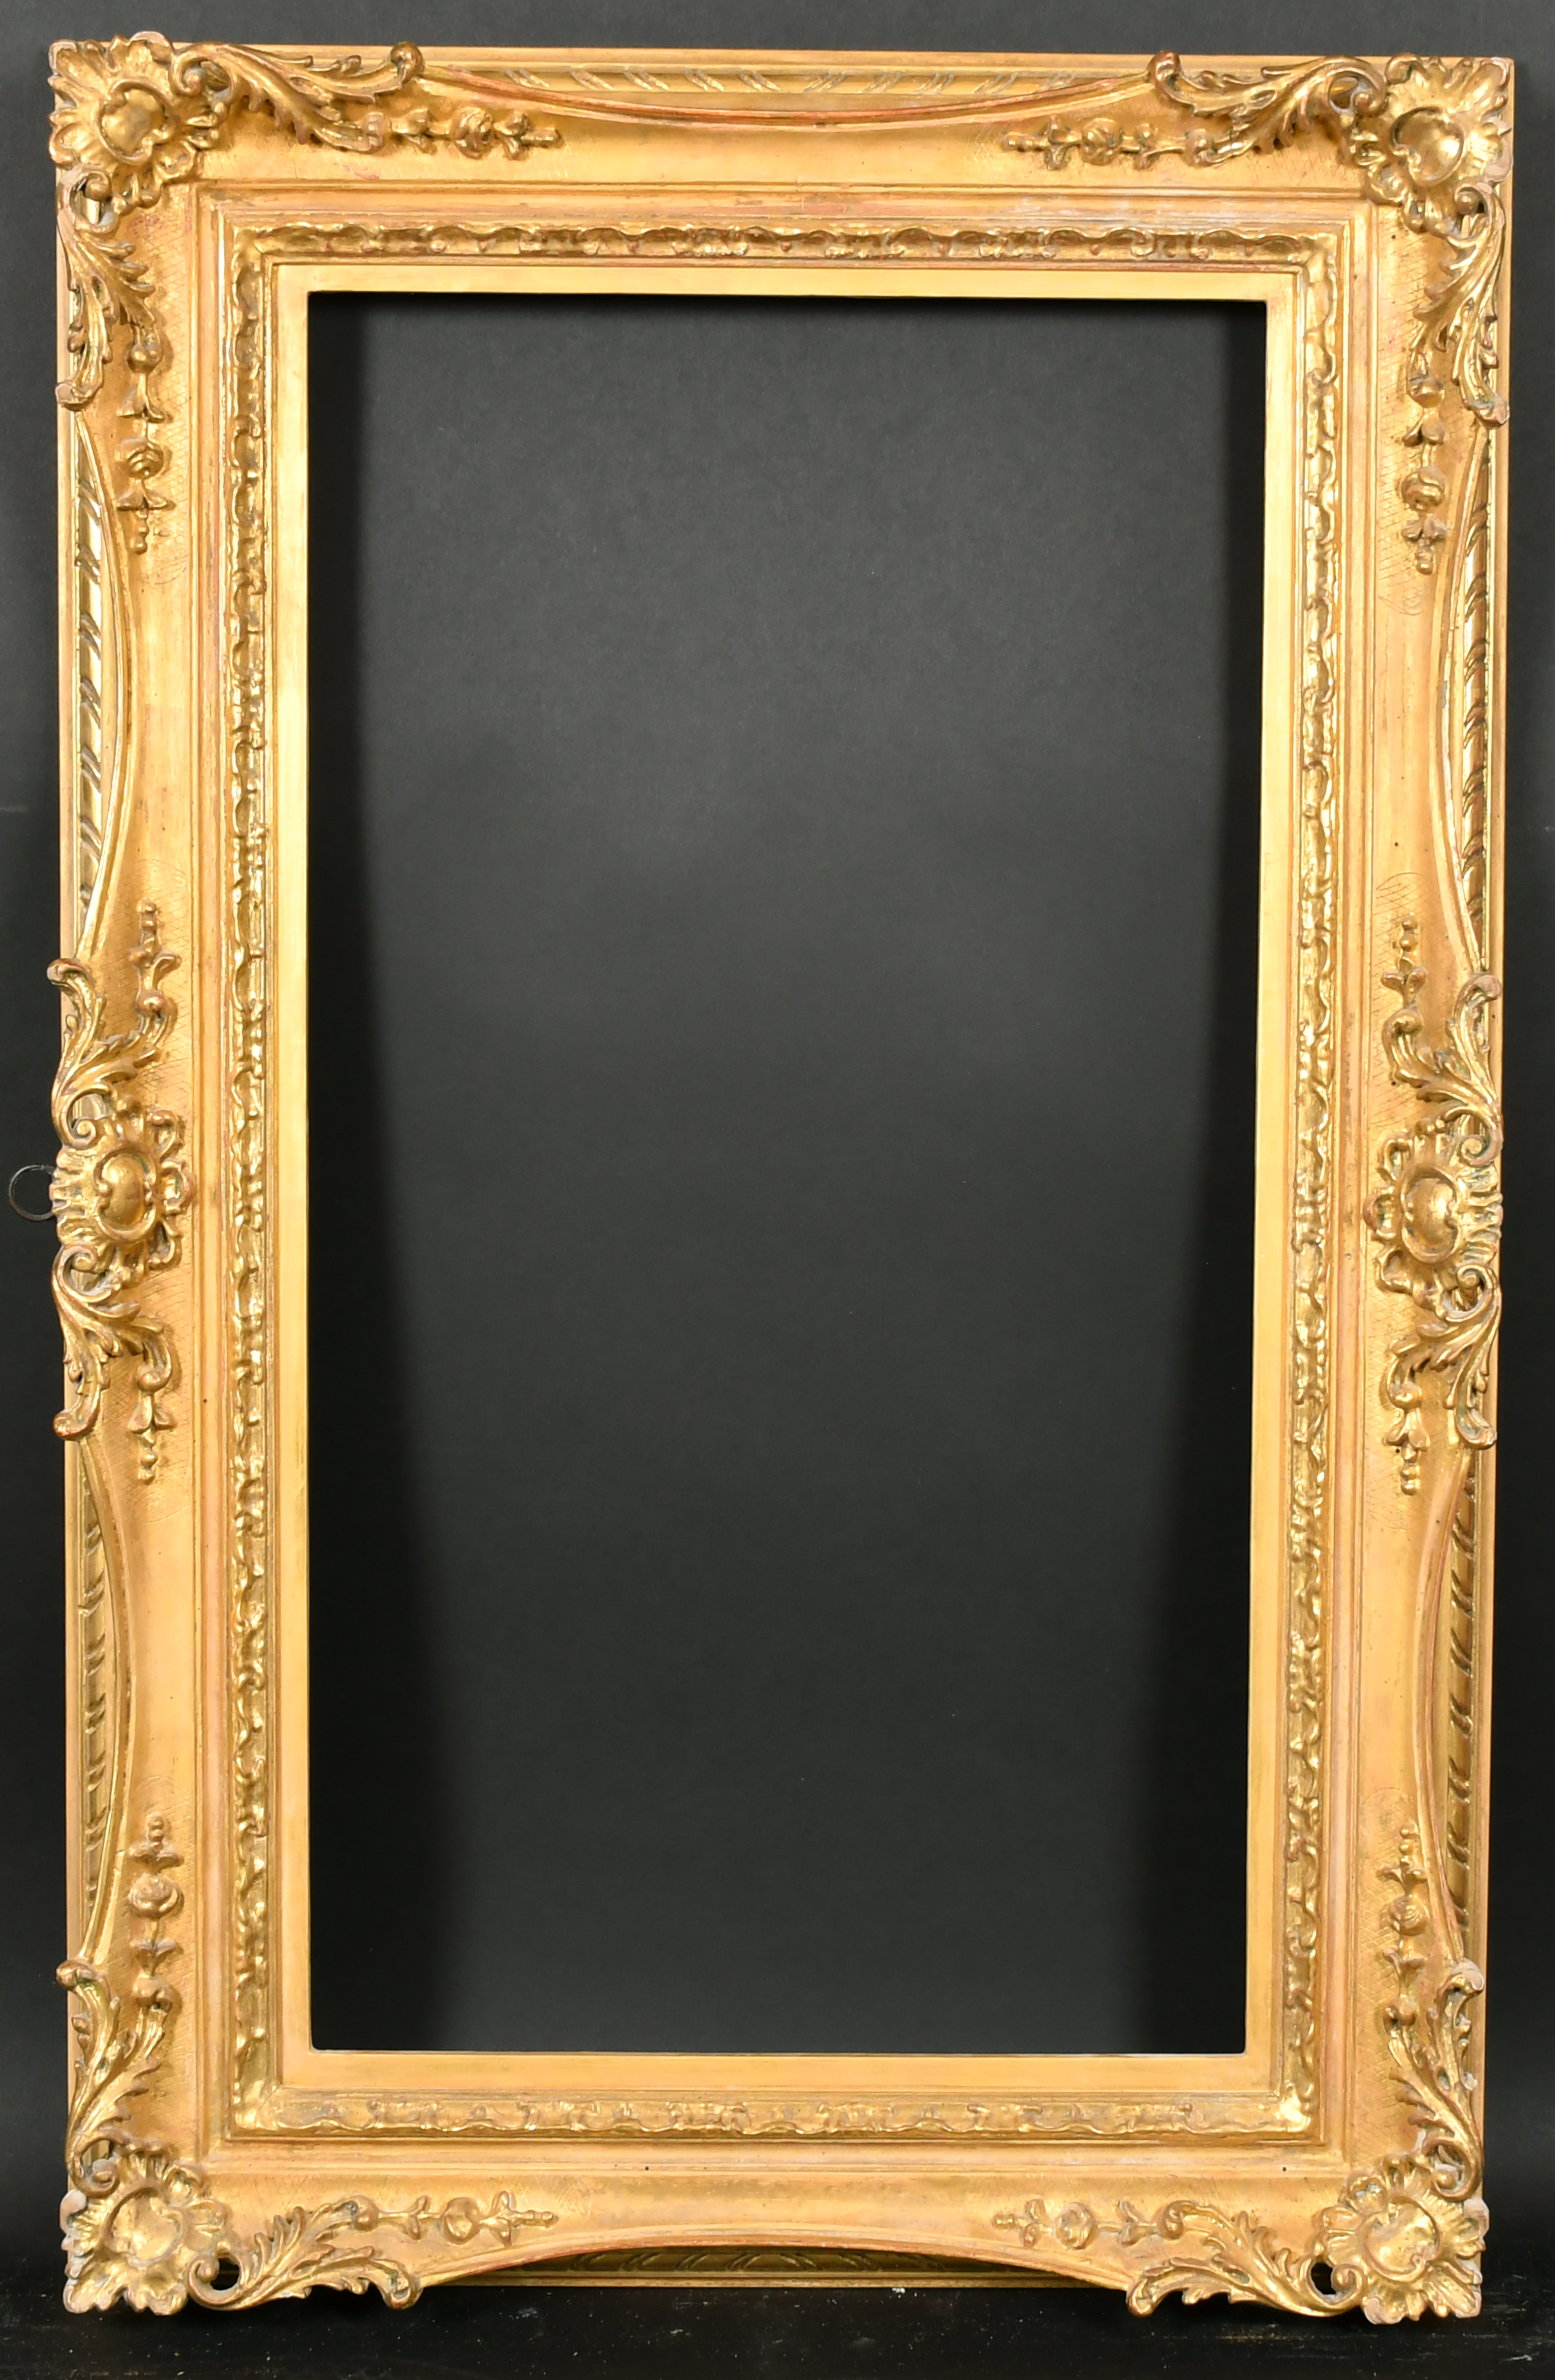 20th Century French School. A Louis XV Style Carved Giltwood Frame, rebate 29.5" x 16.5" (74.9 x - Image 2 of 3